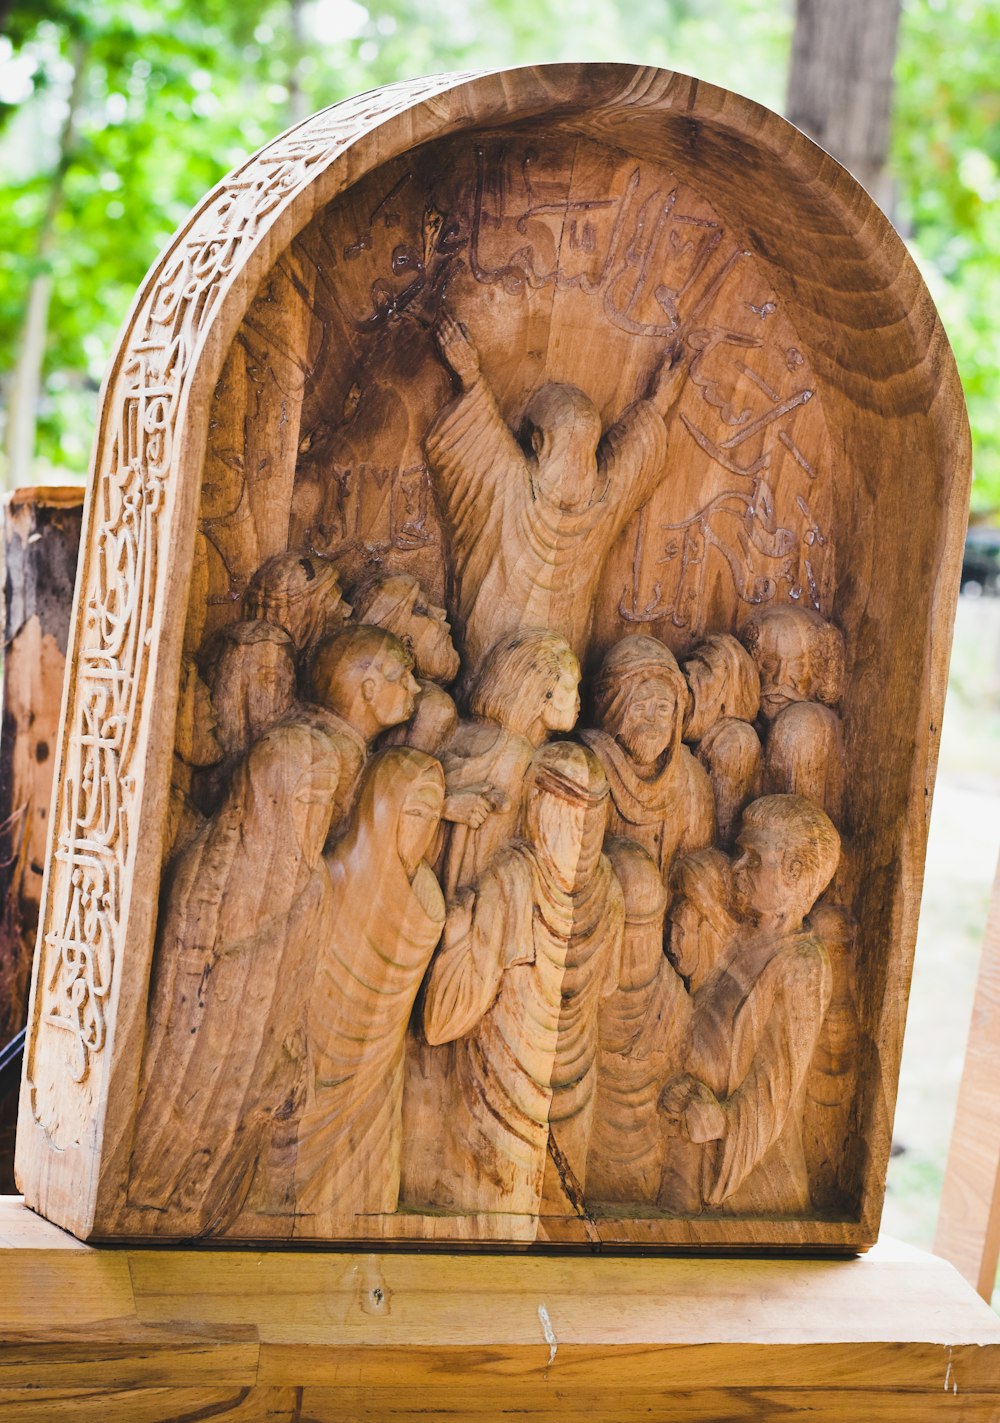 a wooden carving of a group of people